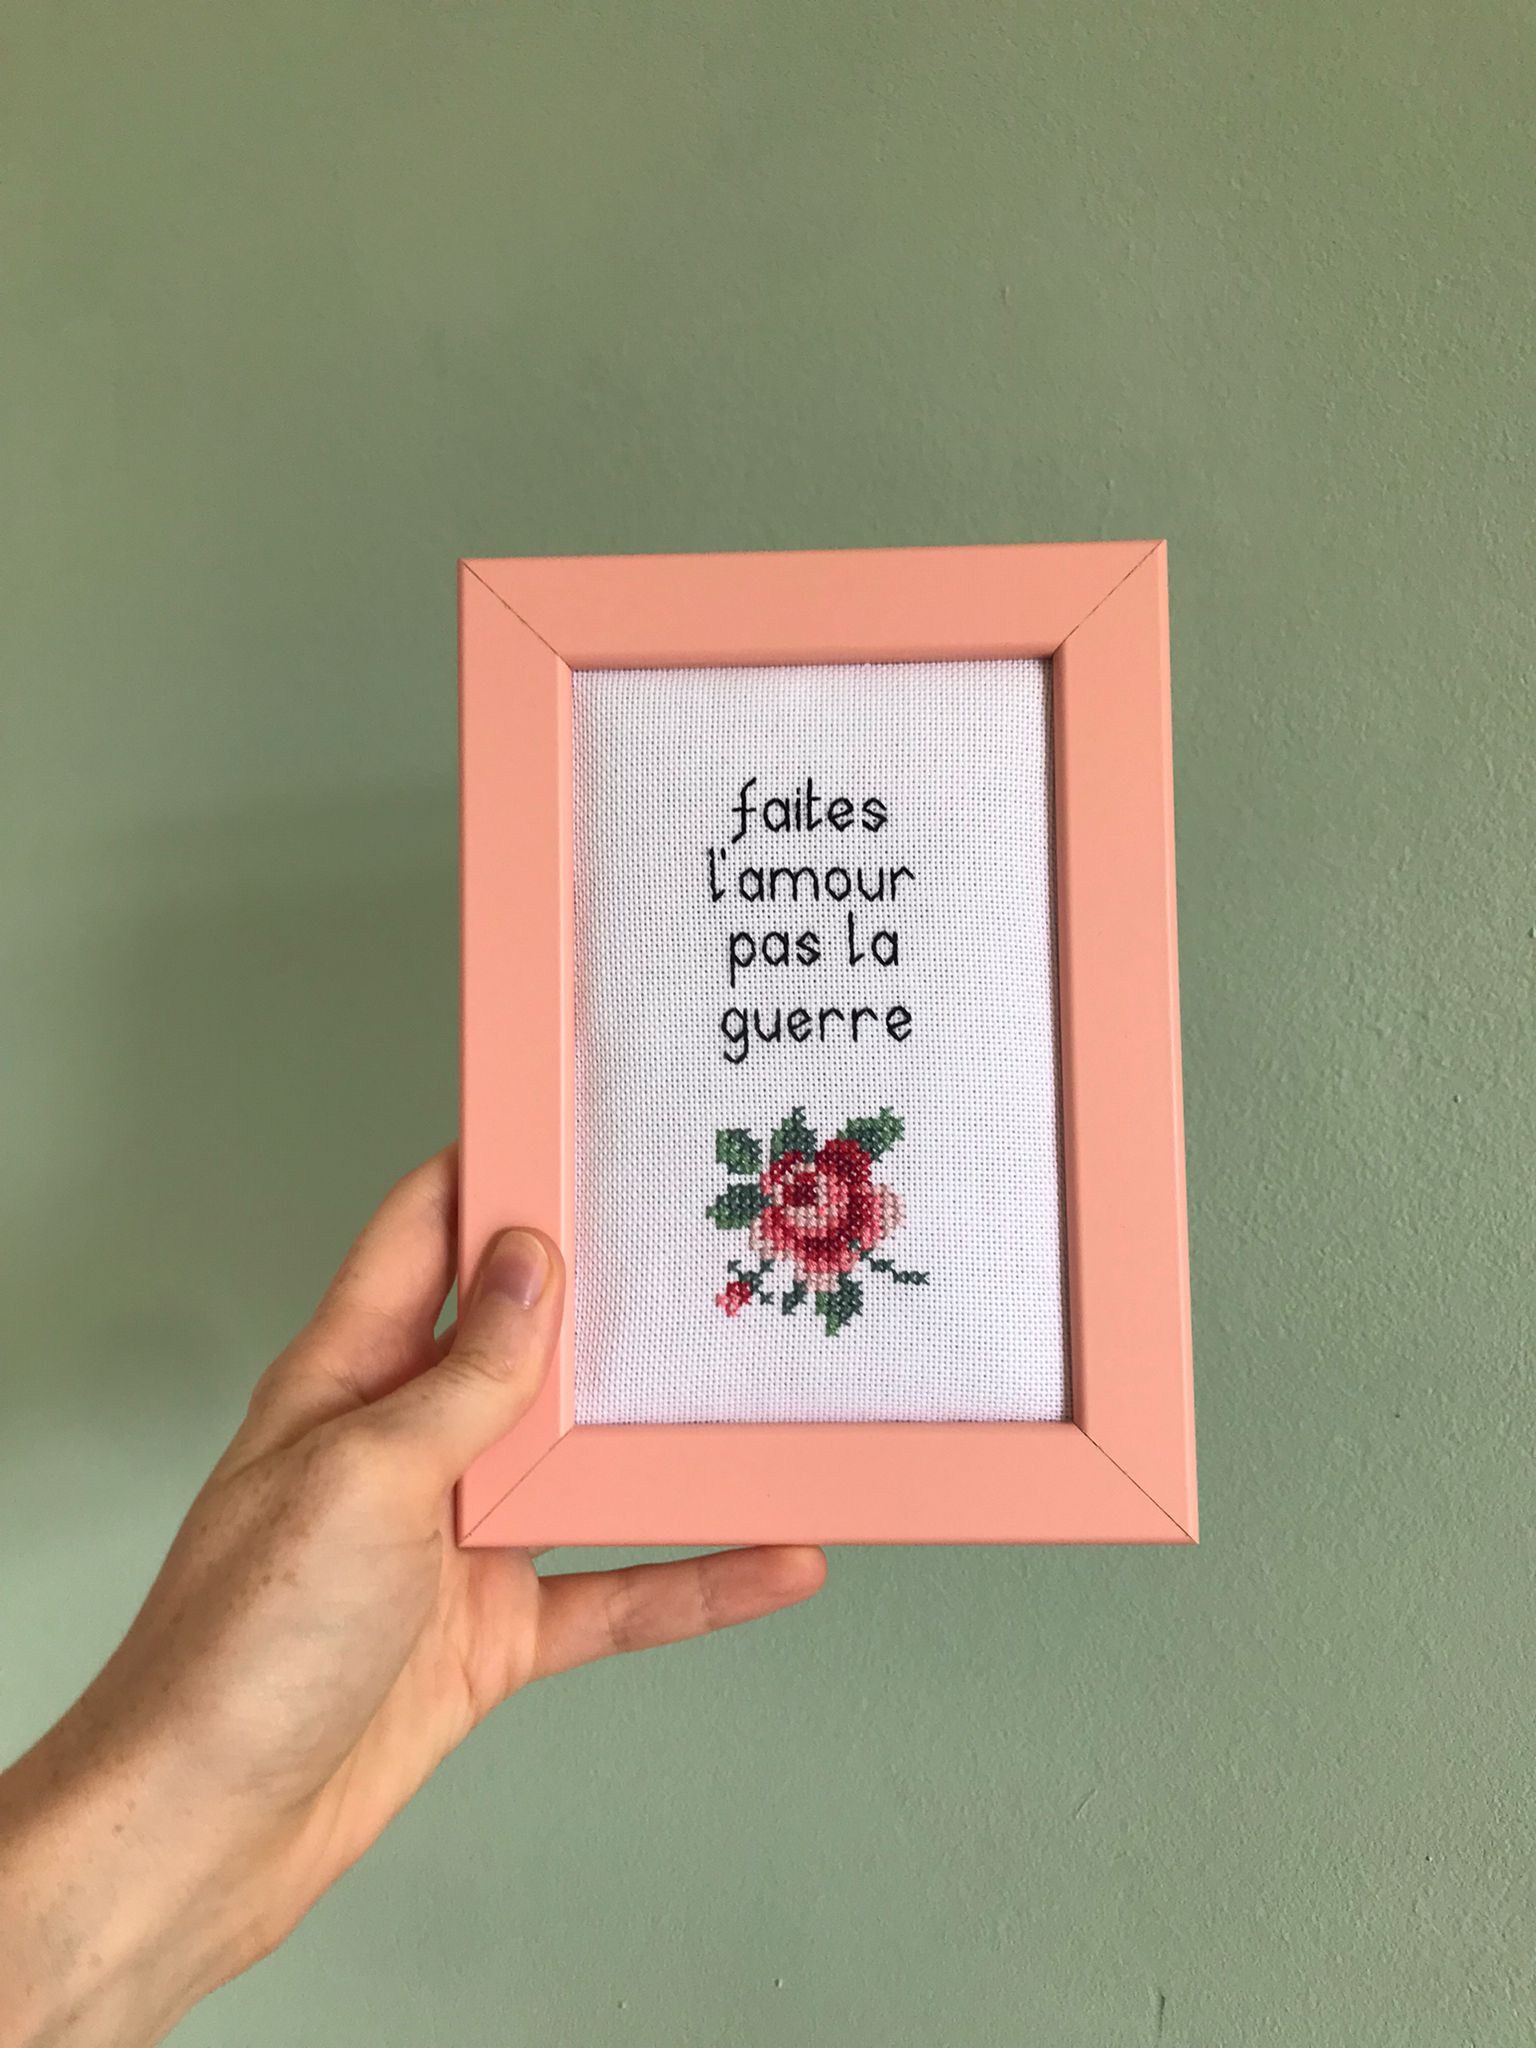 Barbara Guinevra, Faites l'amour pas la guerre, 18x13 cm, Embroidery on fabric, framed, 2021